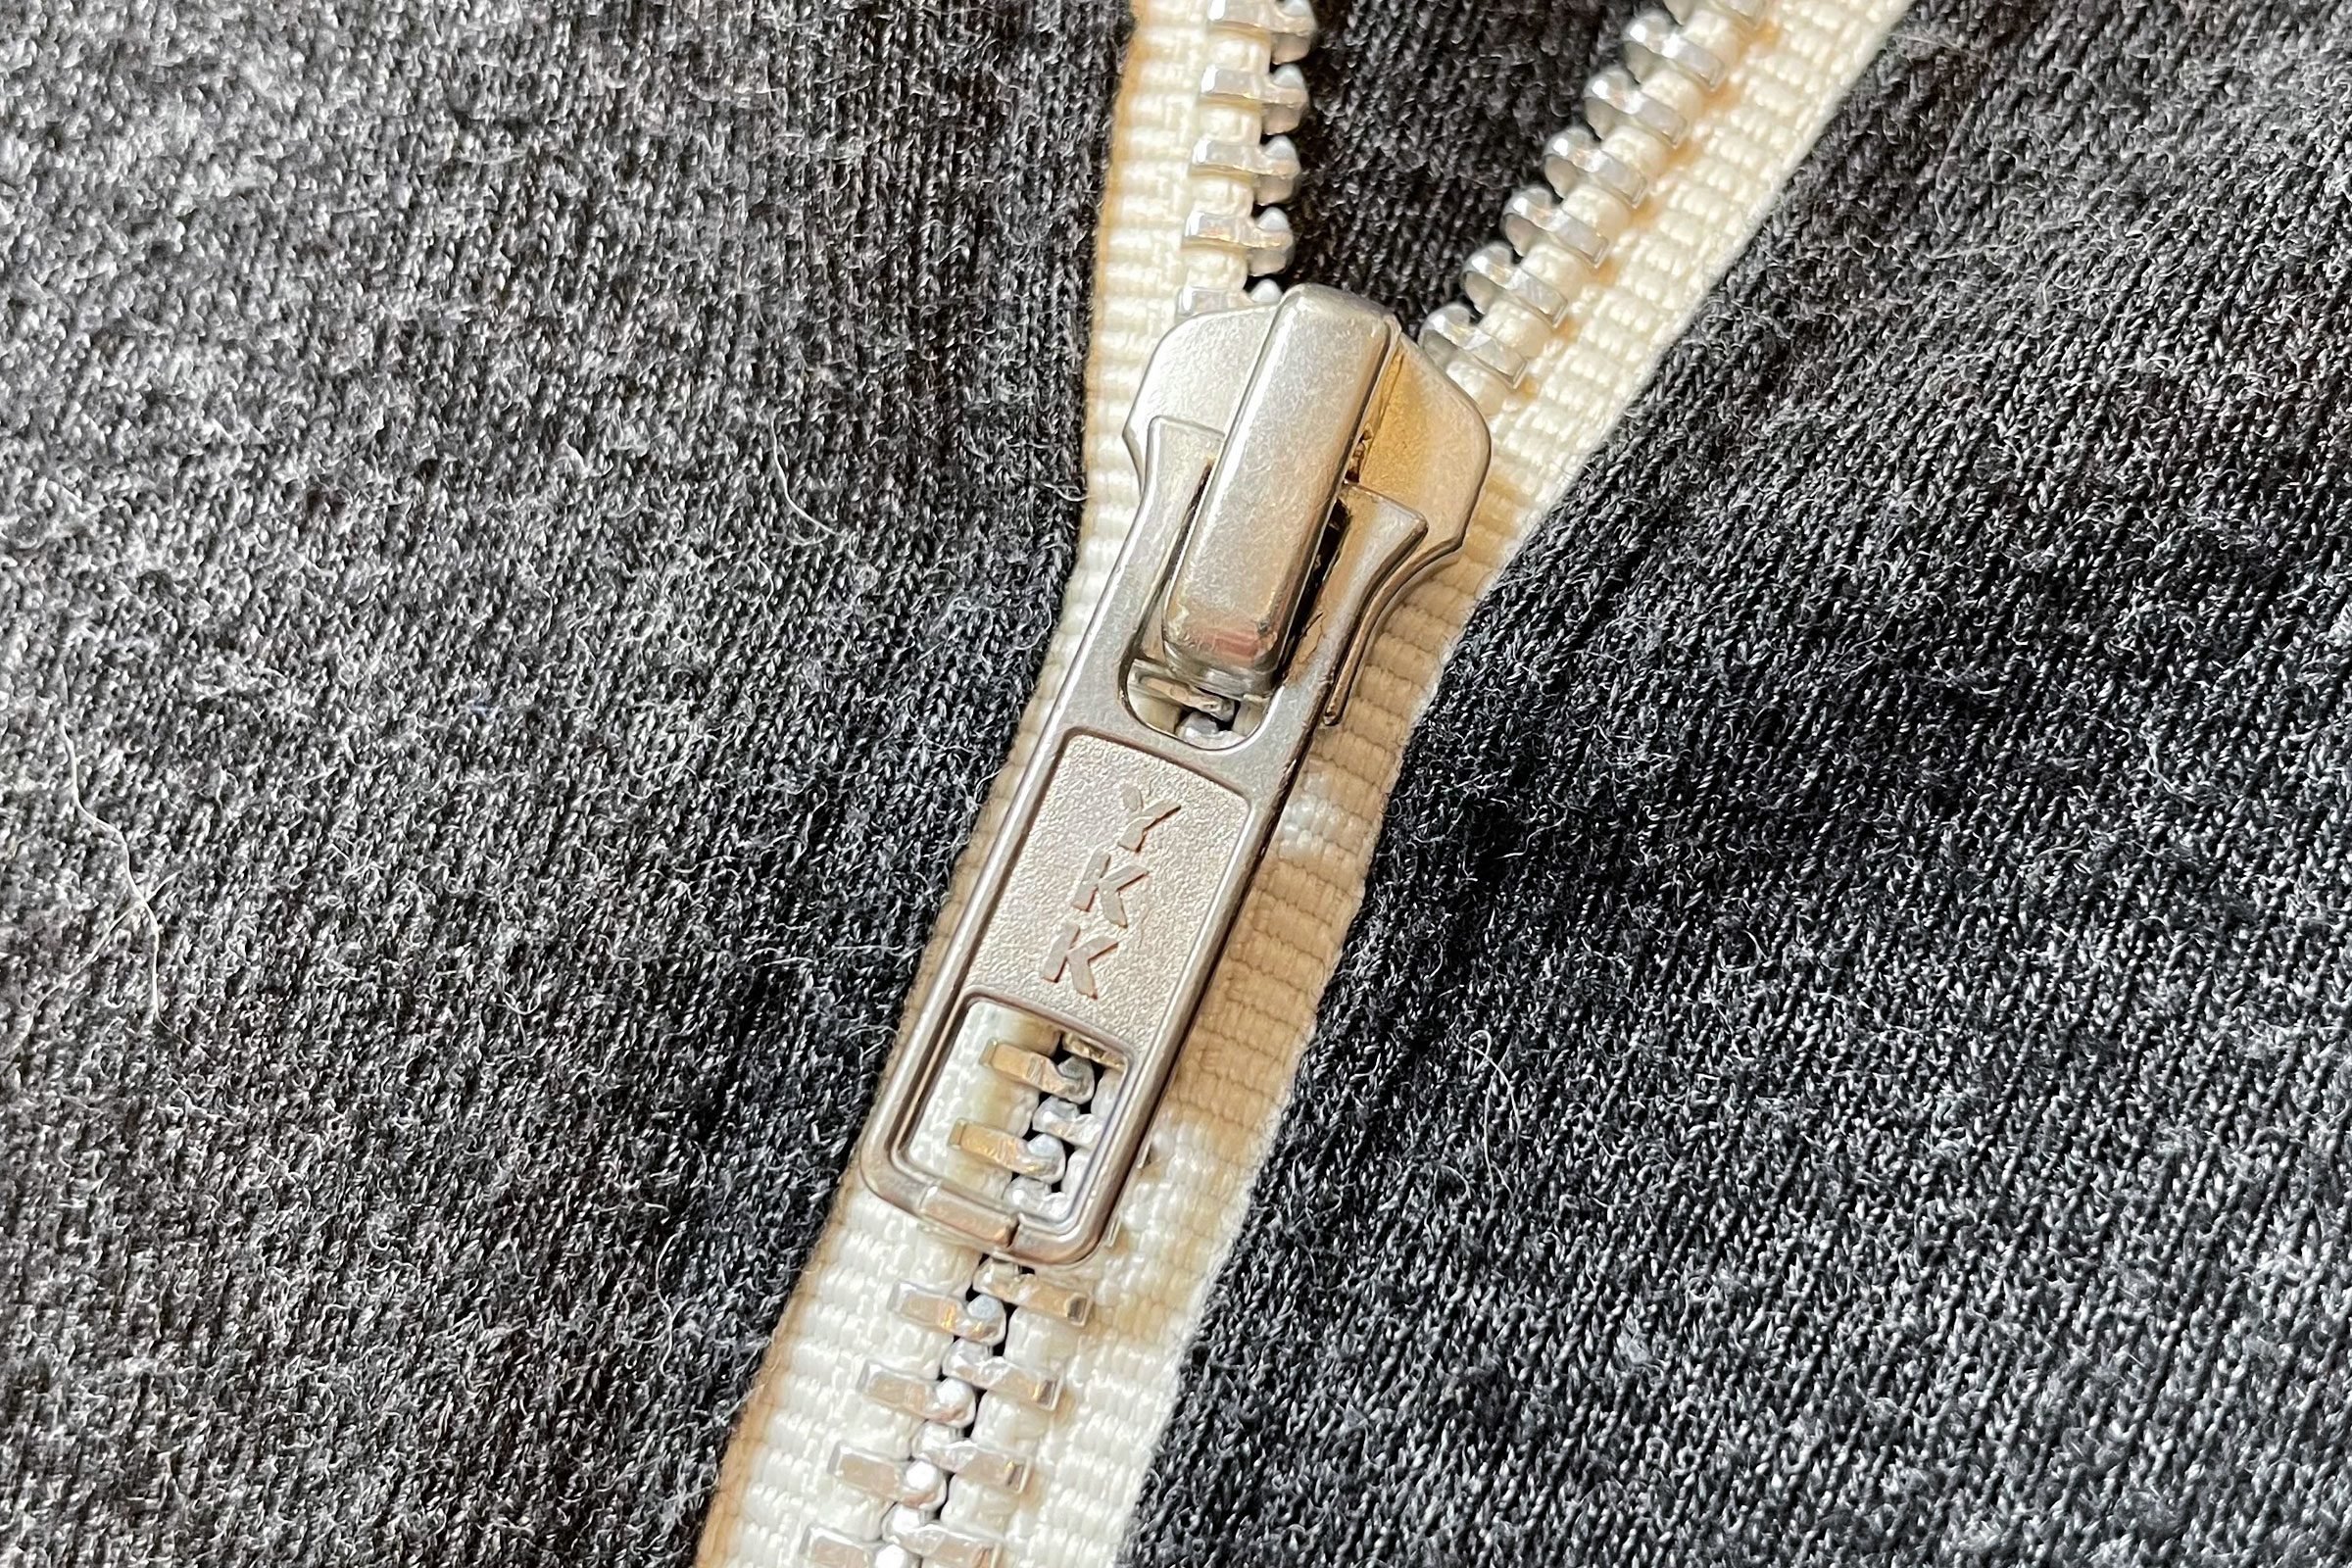 One Japanese Company Makes Half Of The World's Zippers